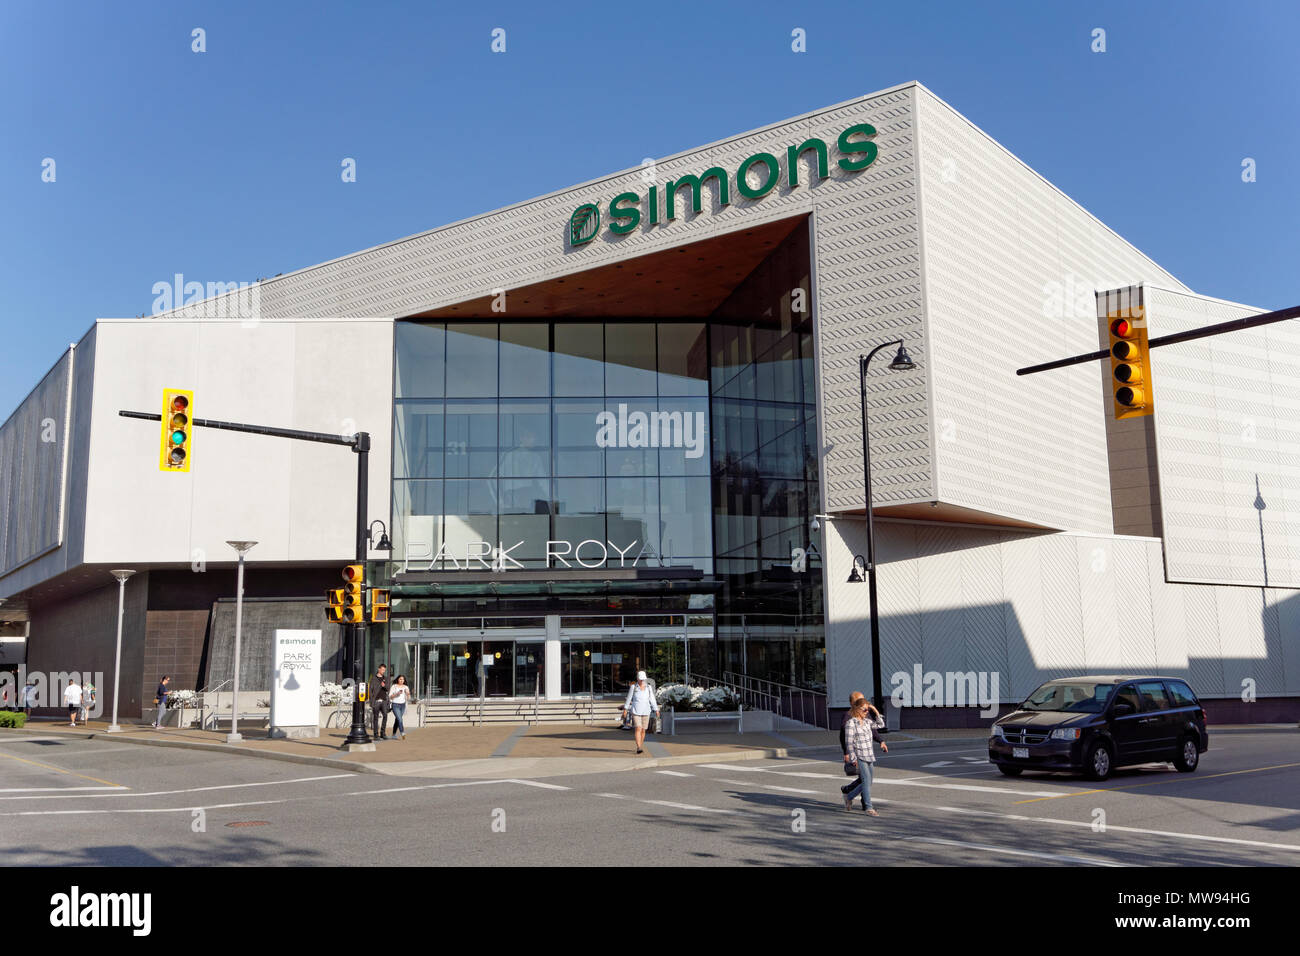 Simons clothing and home decor store in the Park Royal Shopping Centre, West Vancouver, British Columbia, Canada Stock Photo